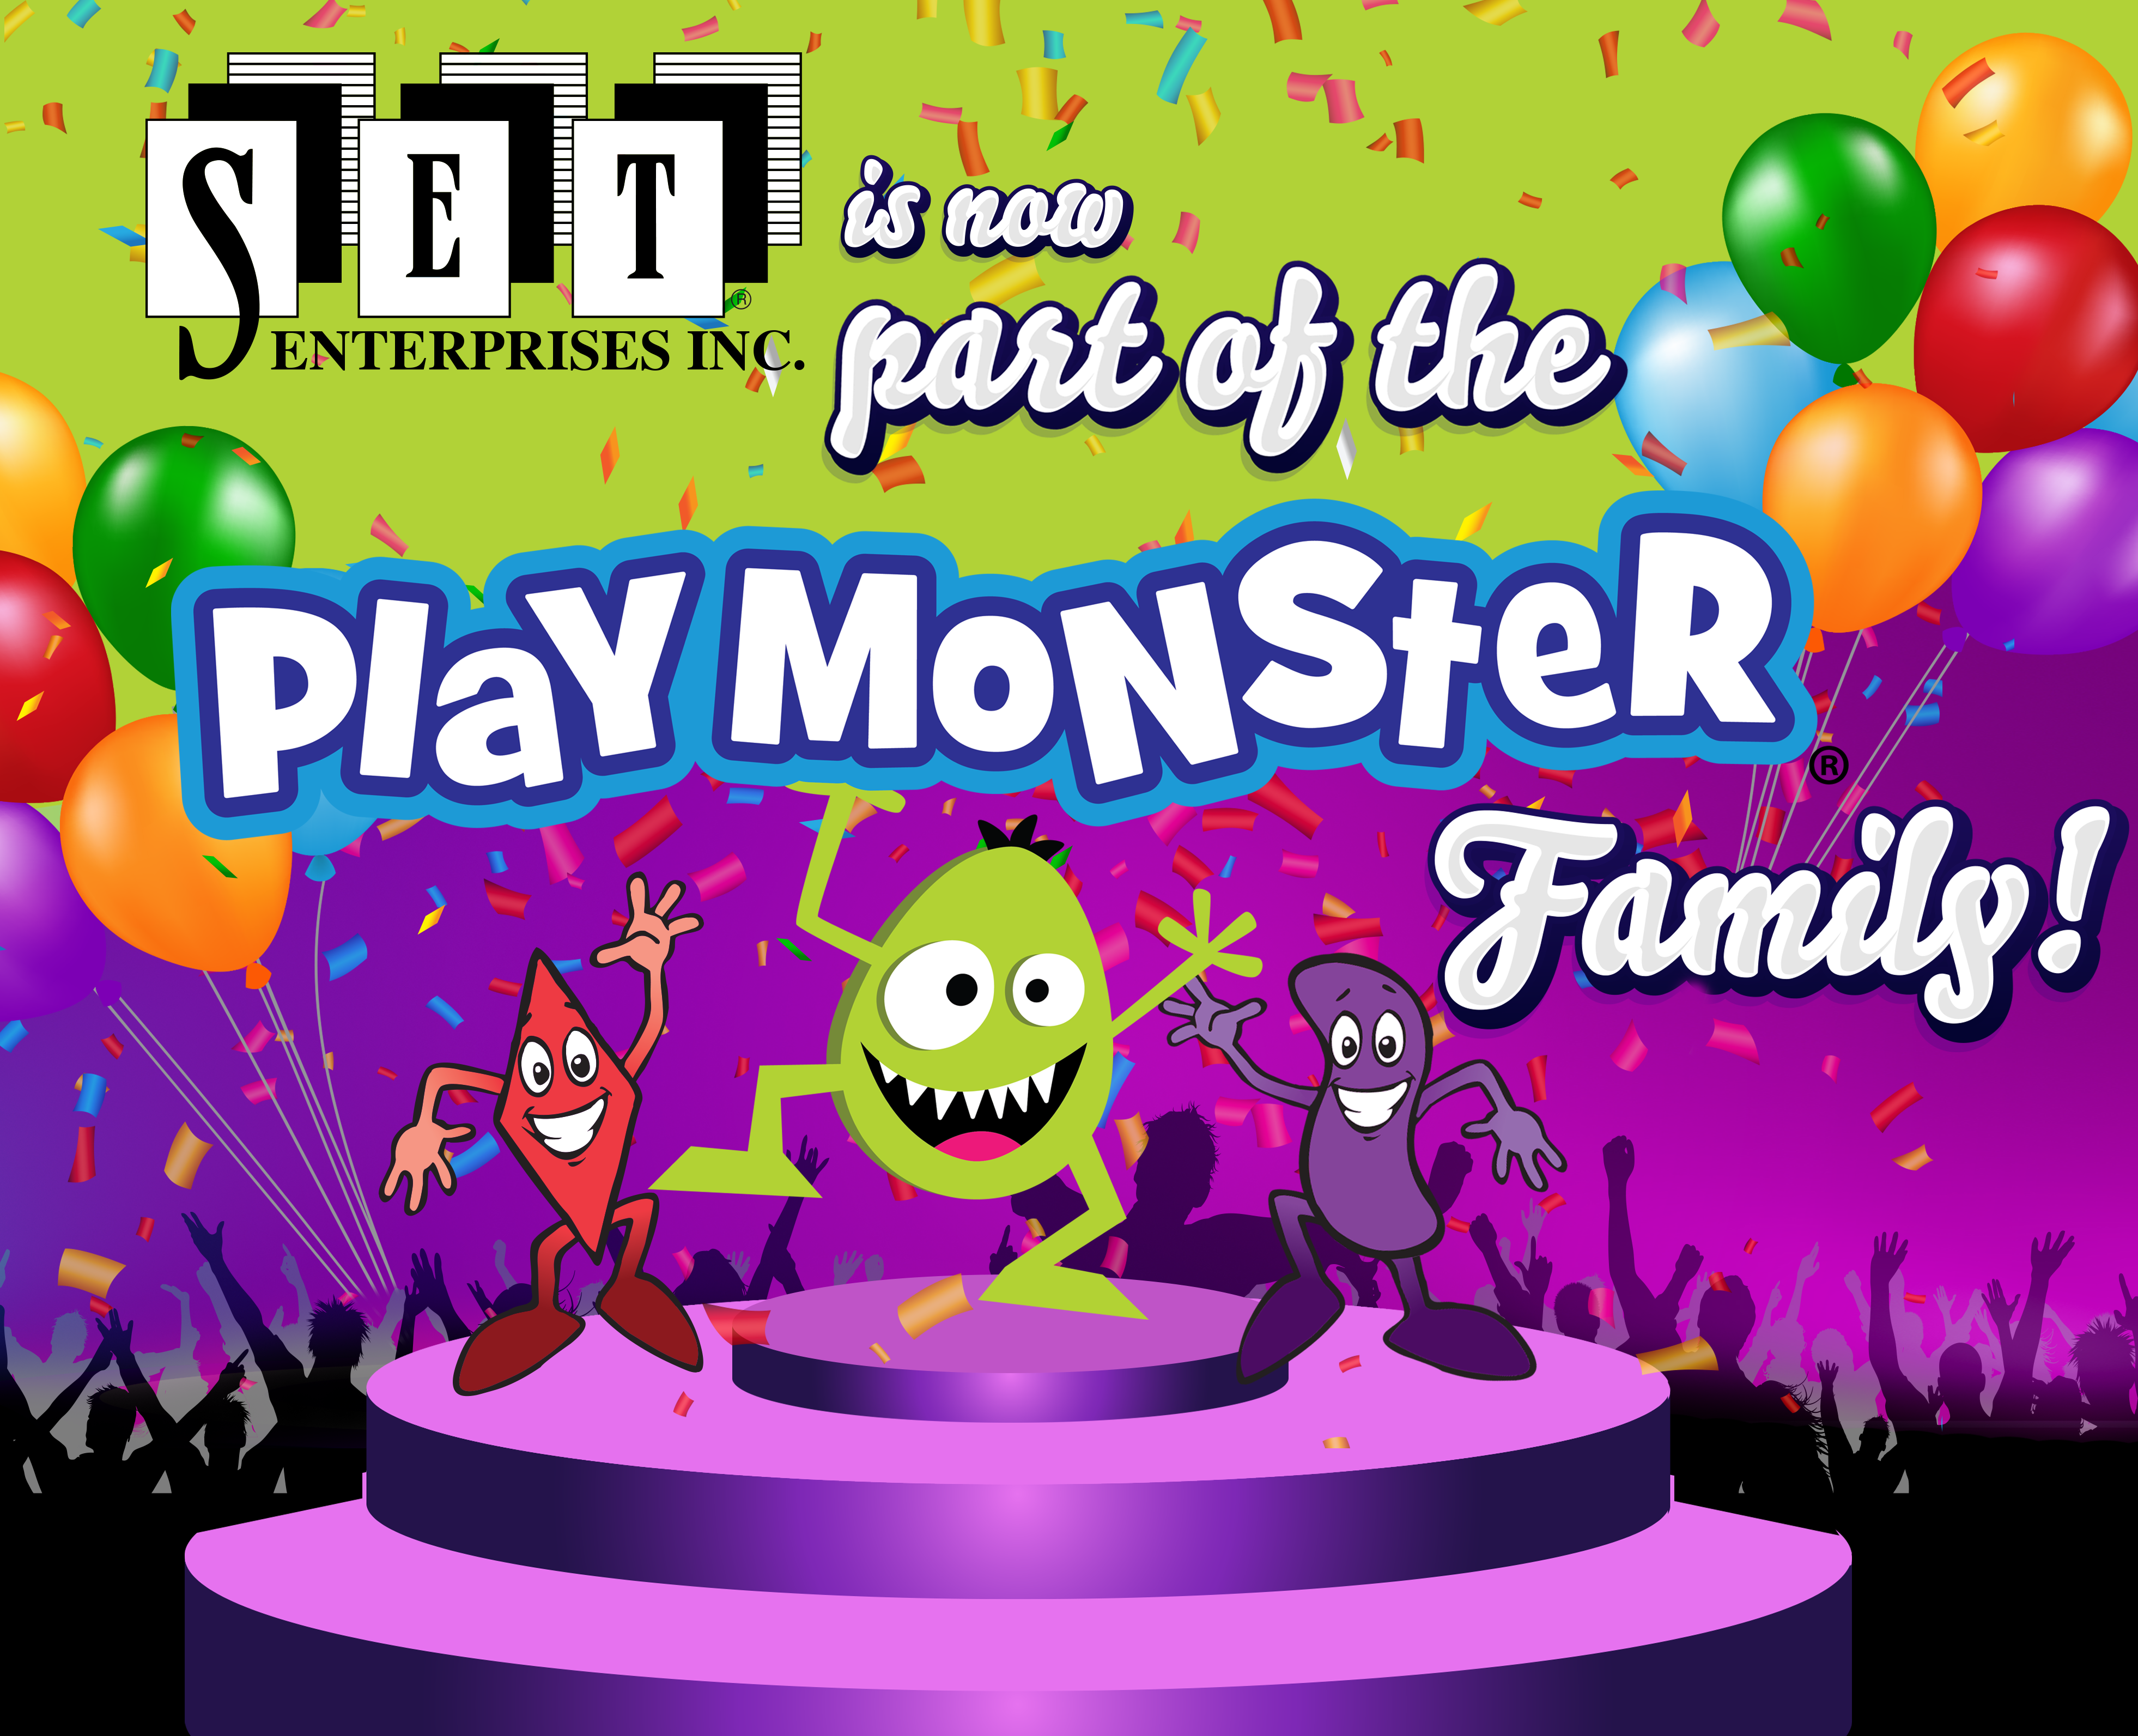 SET-is-now-part-of-the-PlayMonster-family